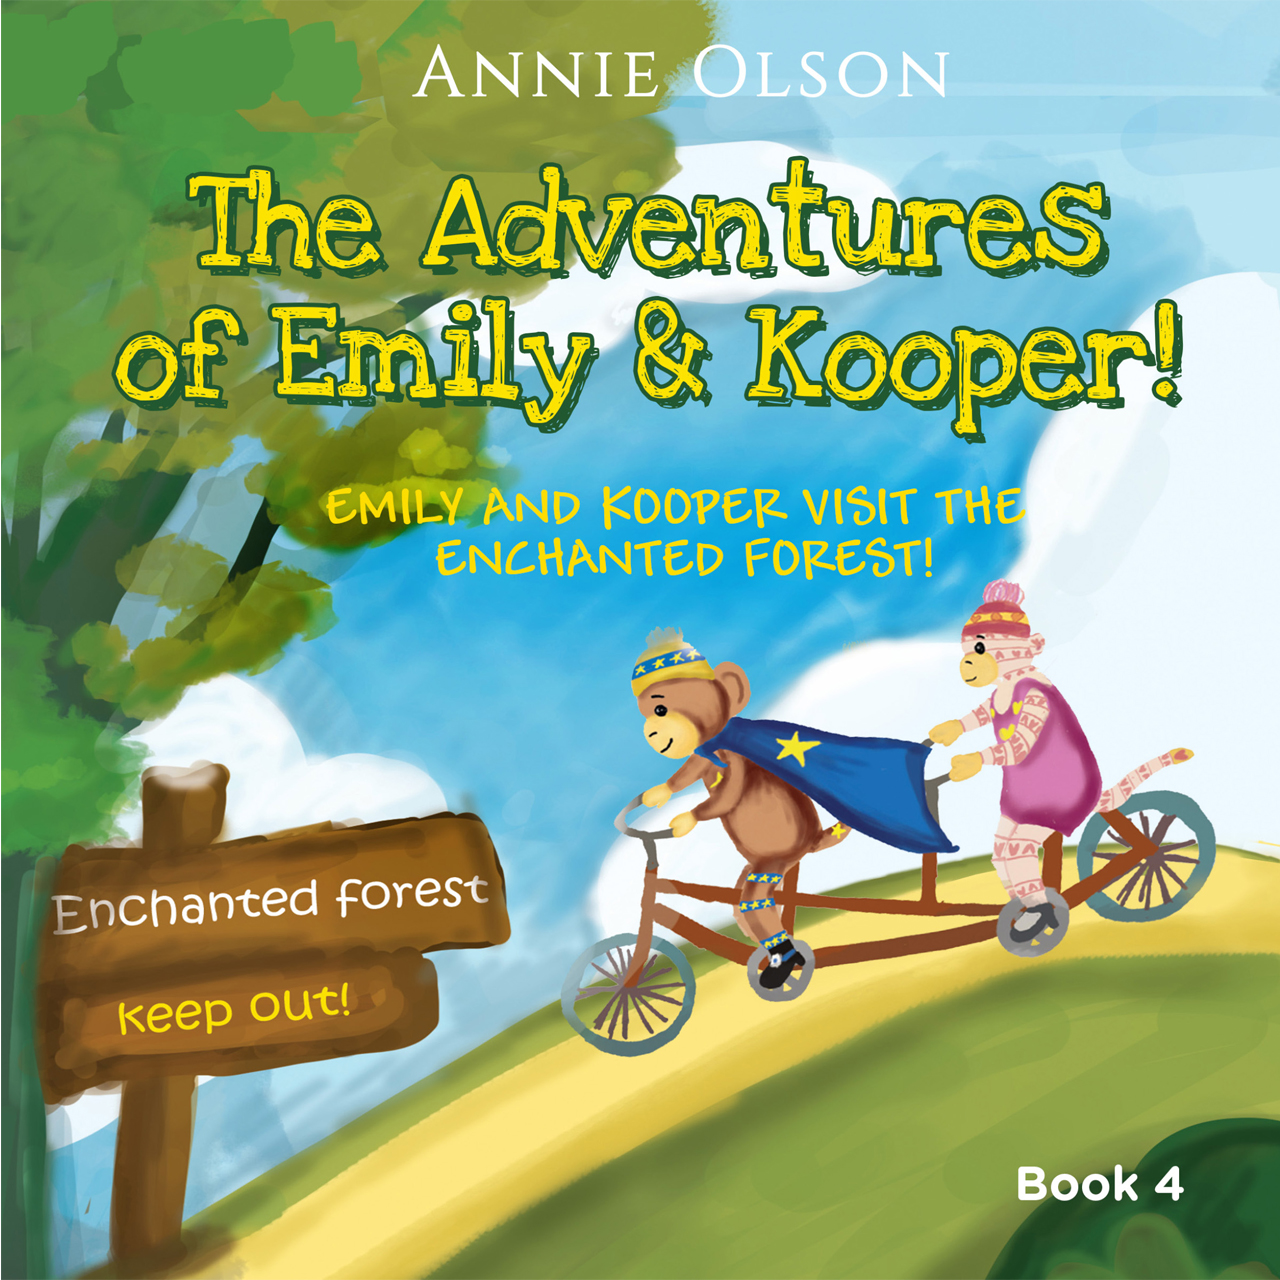 Emily and Kooper visit the Enchanted Forest